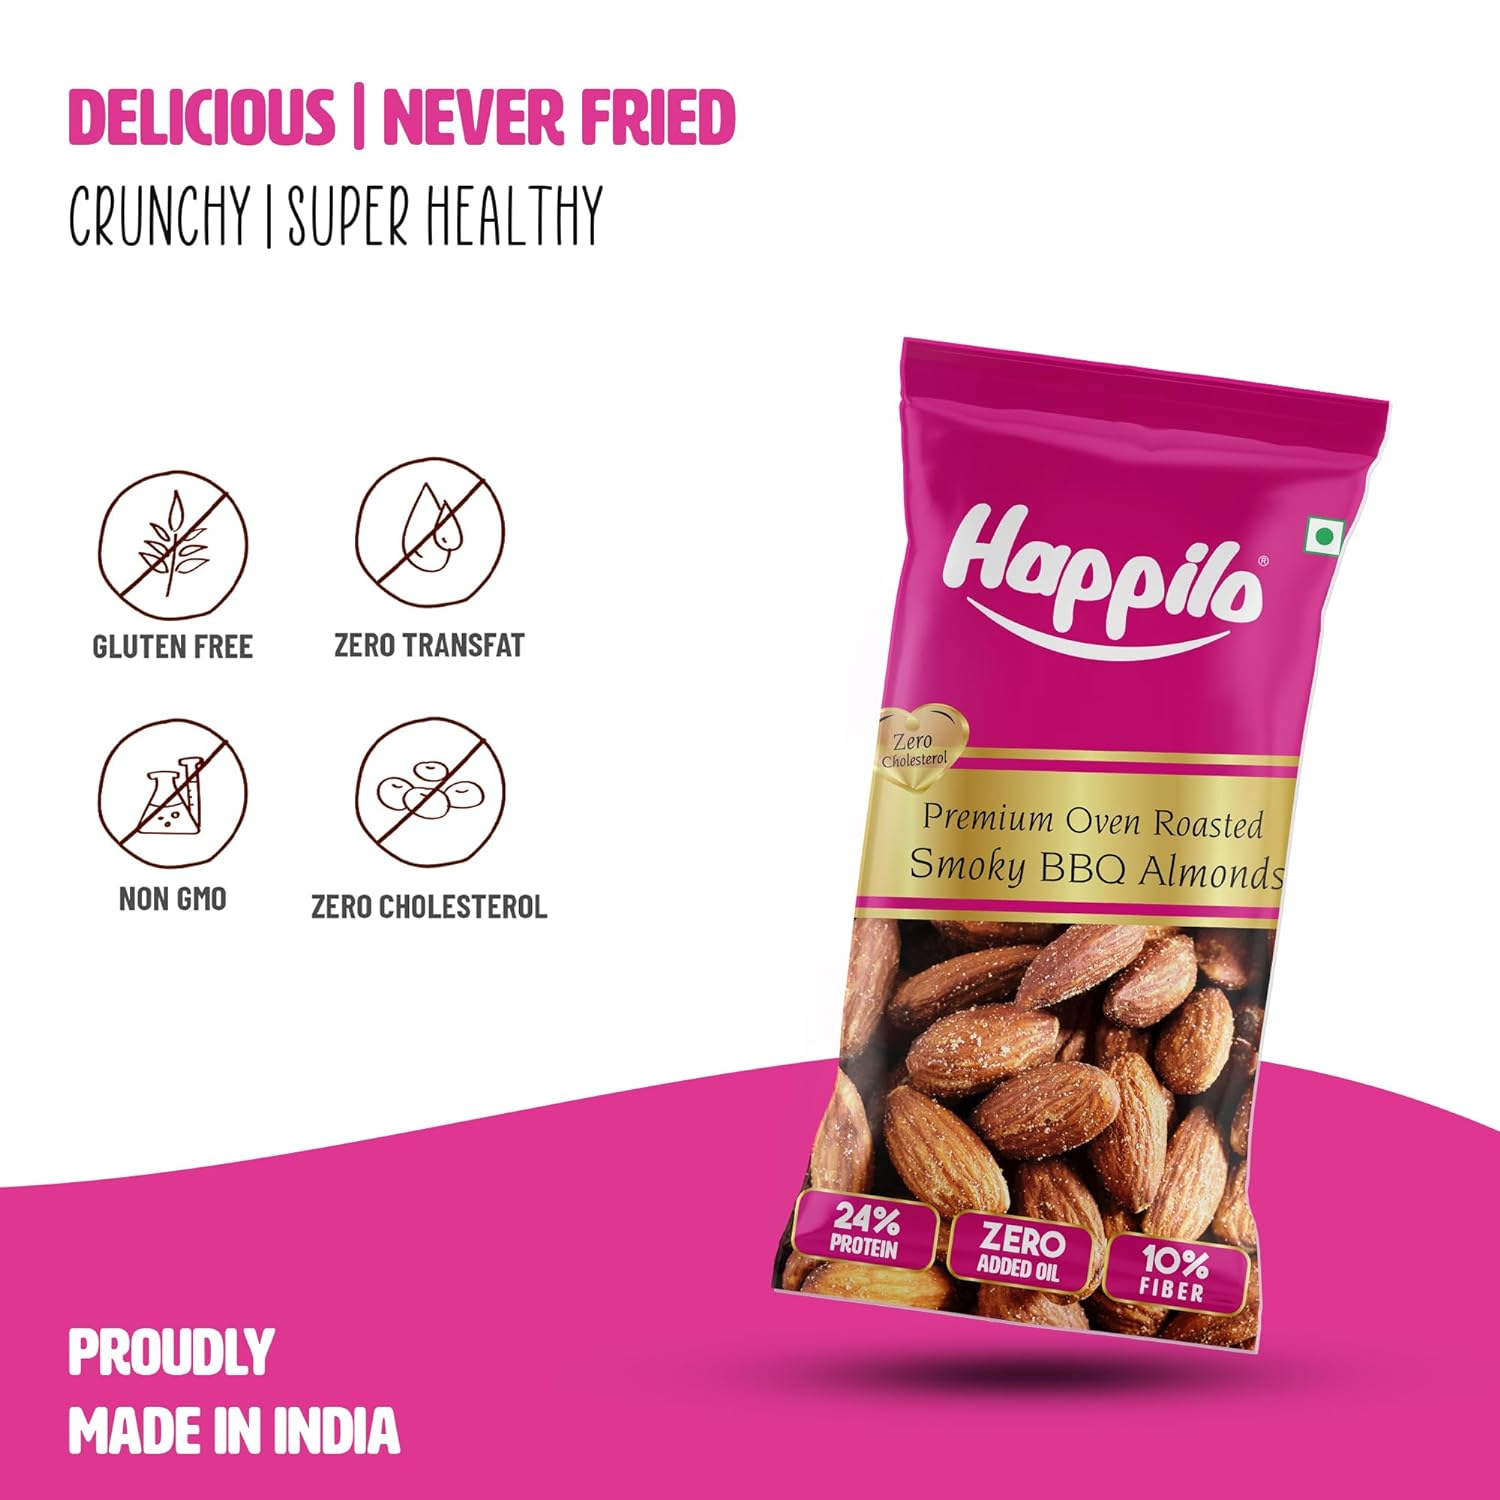 Happilo Smart Snack Barbeque Californian Almonds (Pack Of 12) 15g+3g (20% Extra)